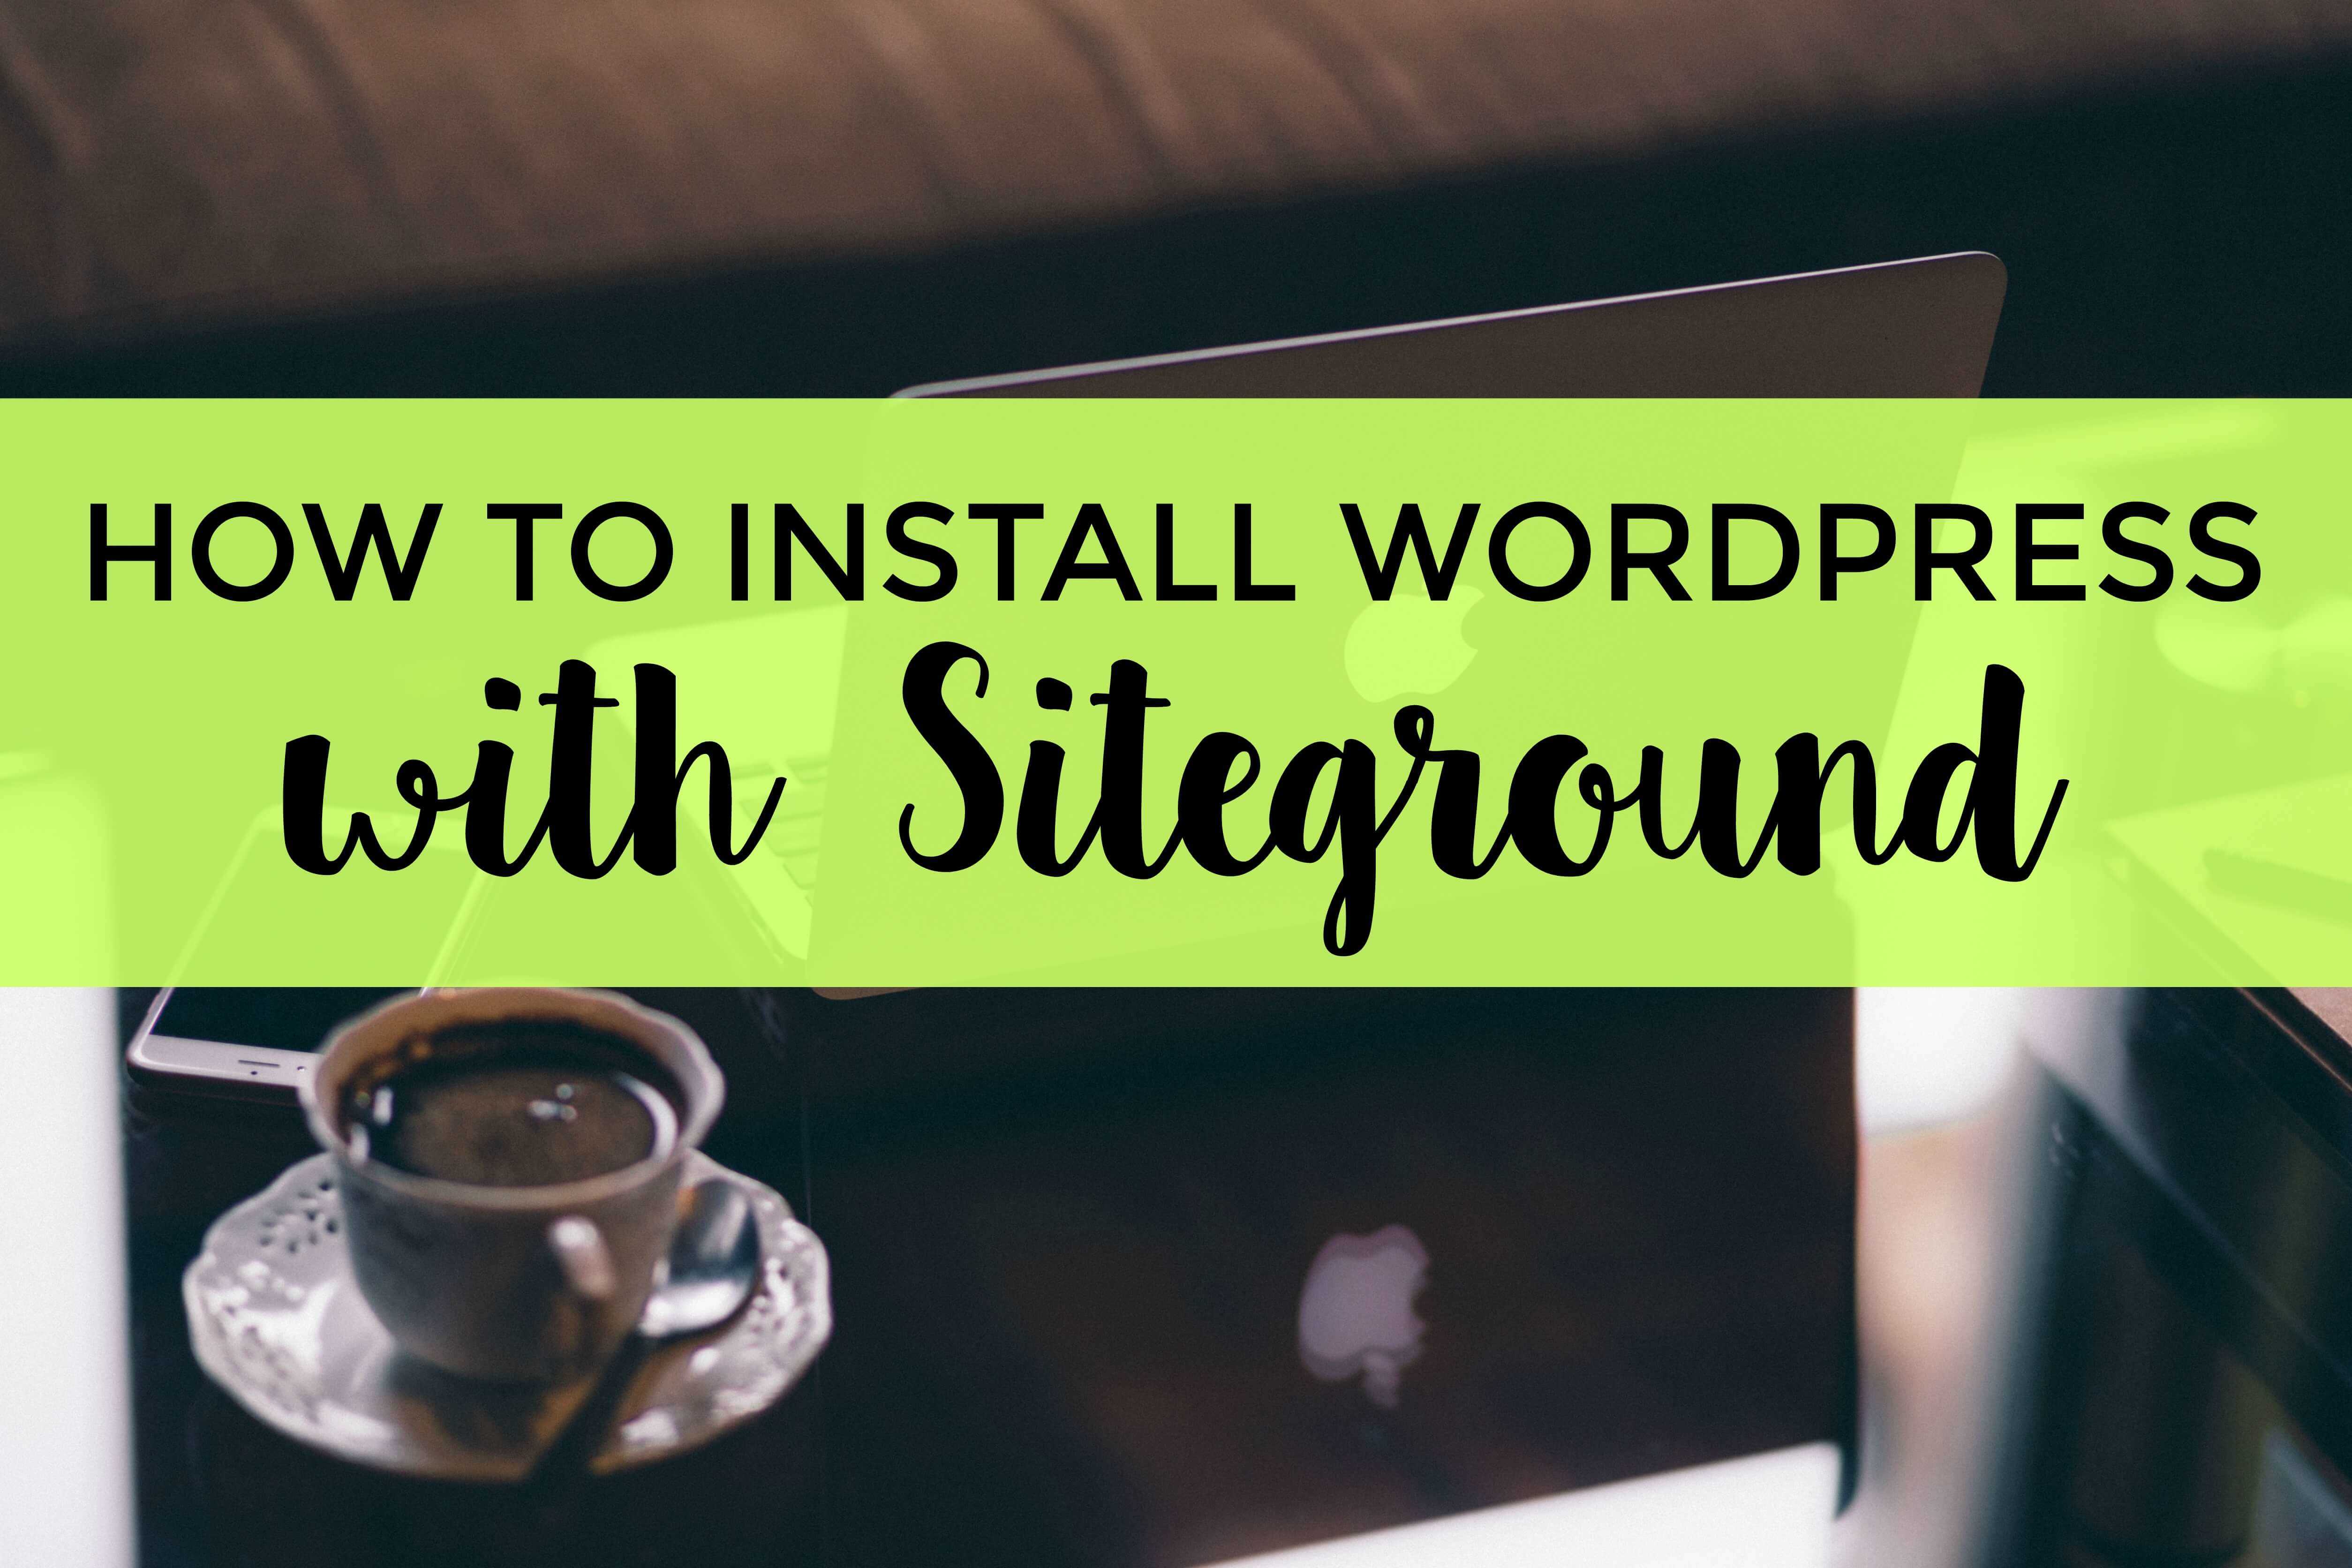 How to Install WordPress with SiteGround